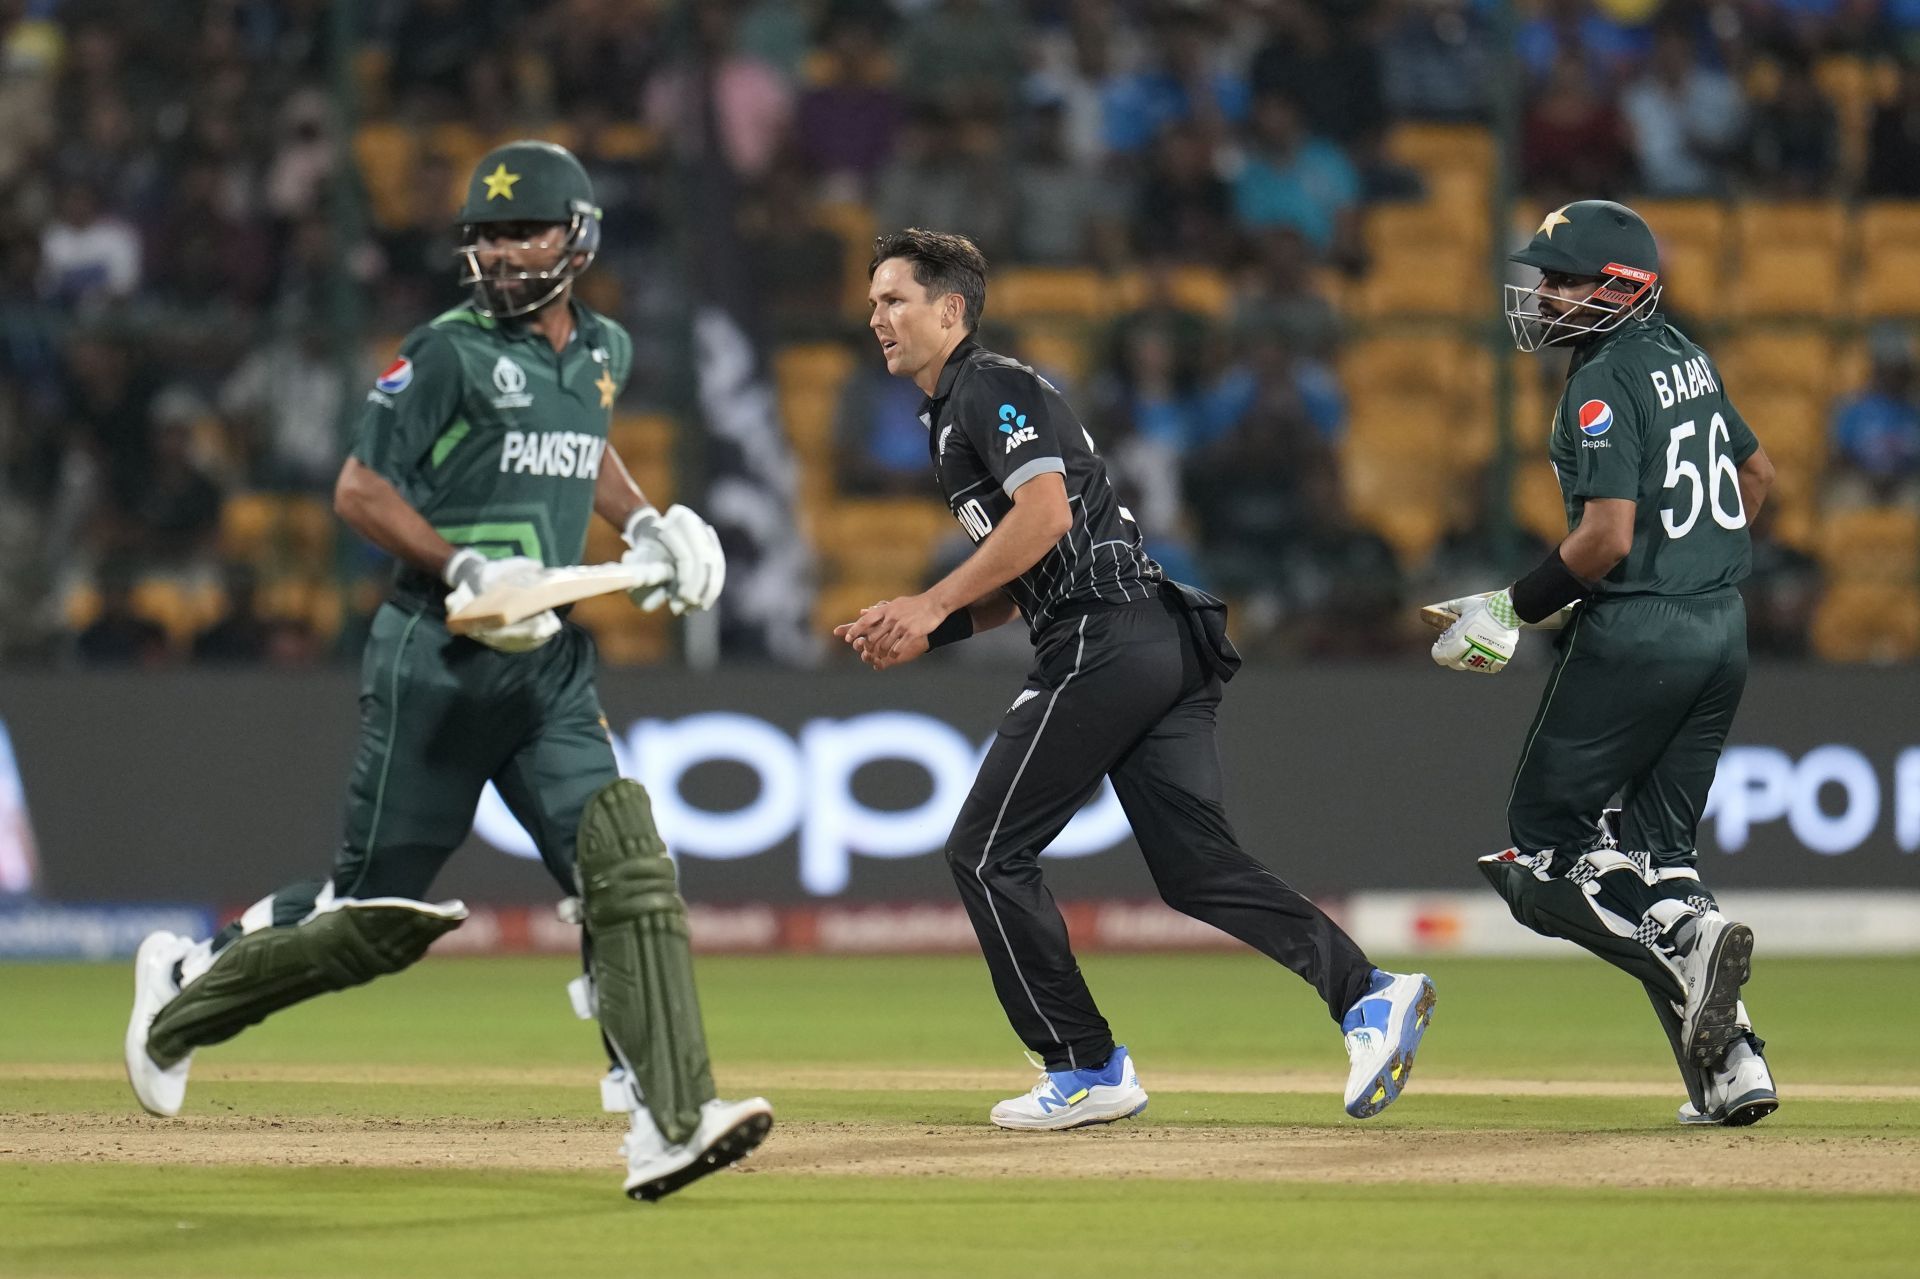 Pakistan and New Zealand played out a high-scoring rain-interrupted classic